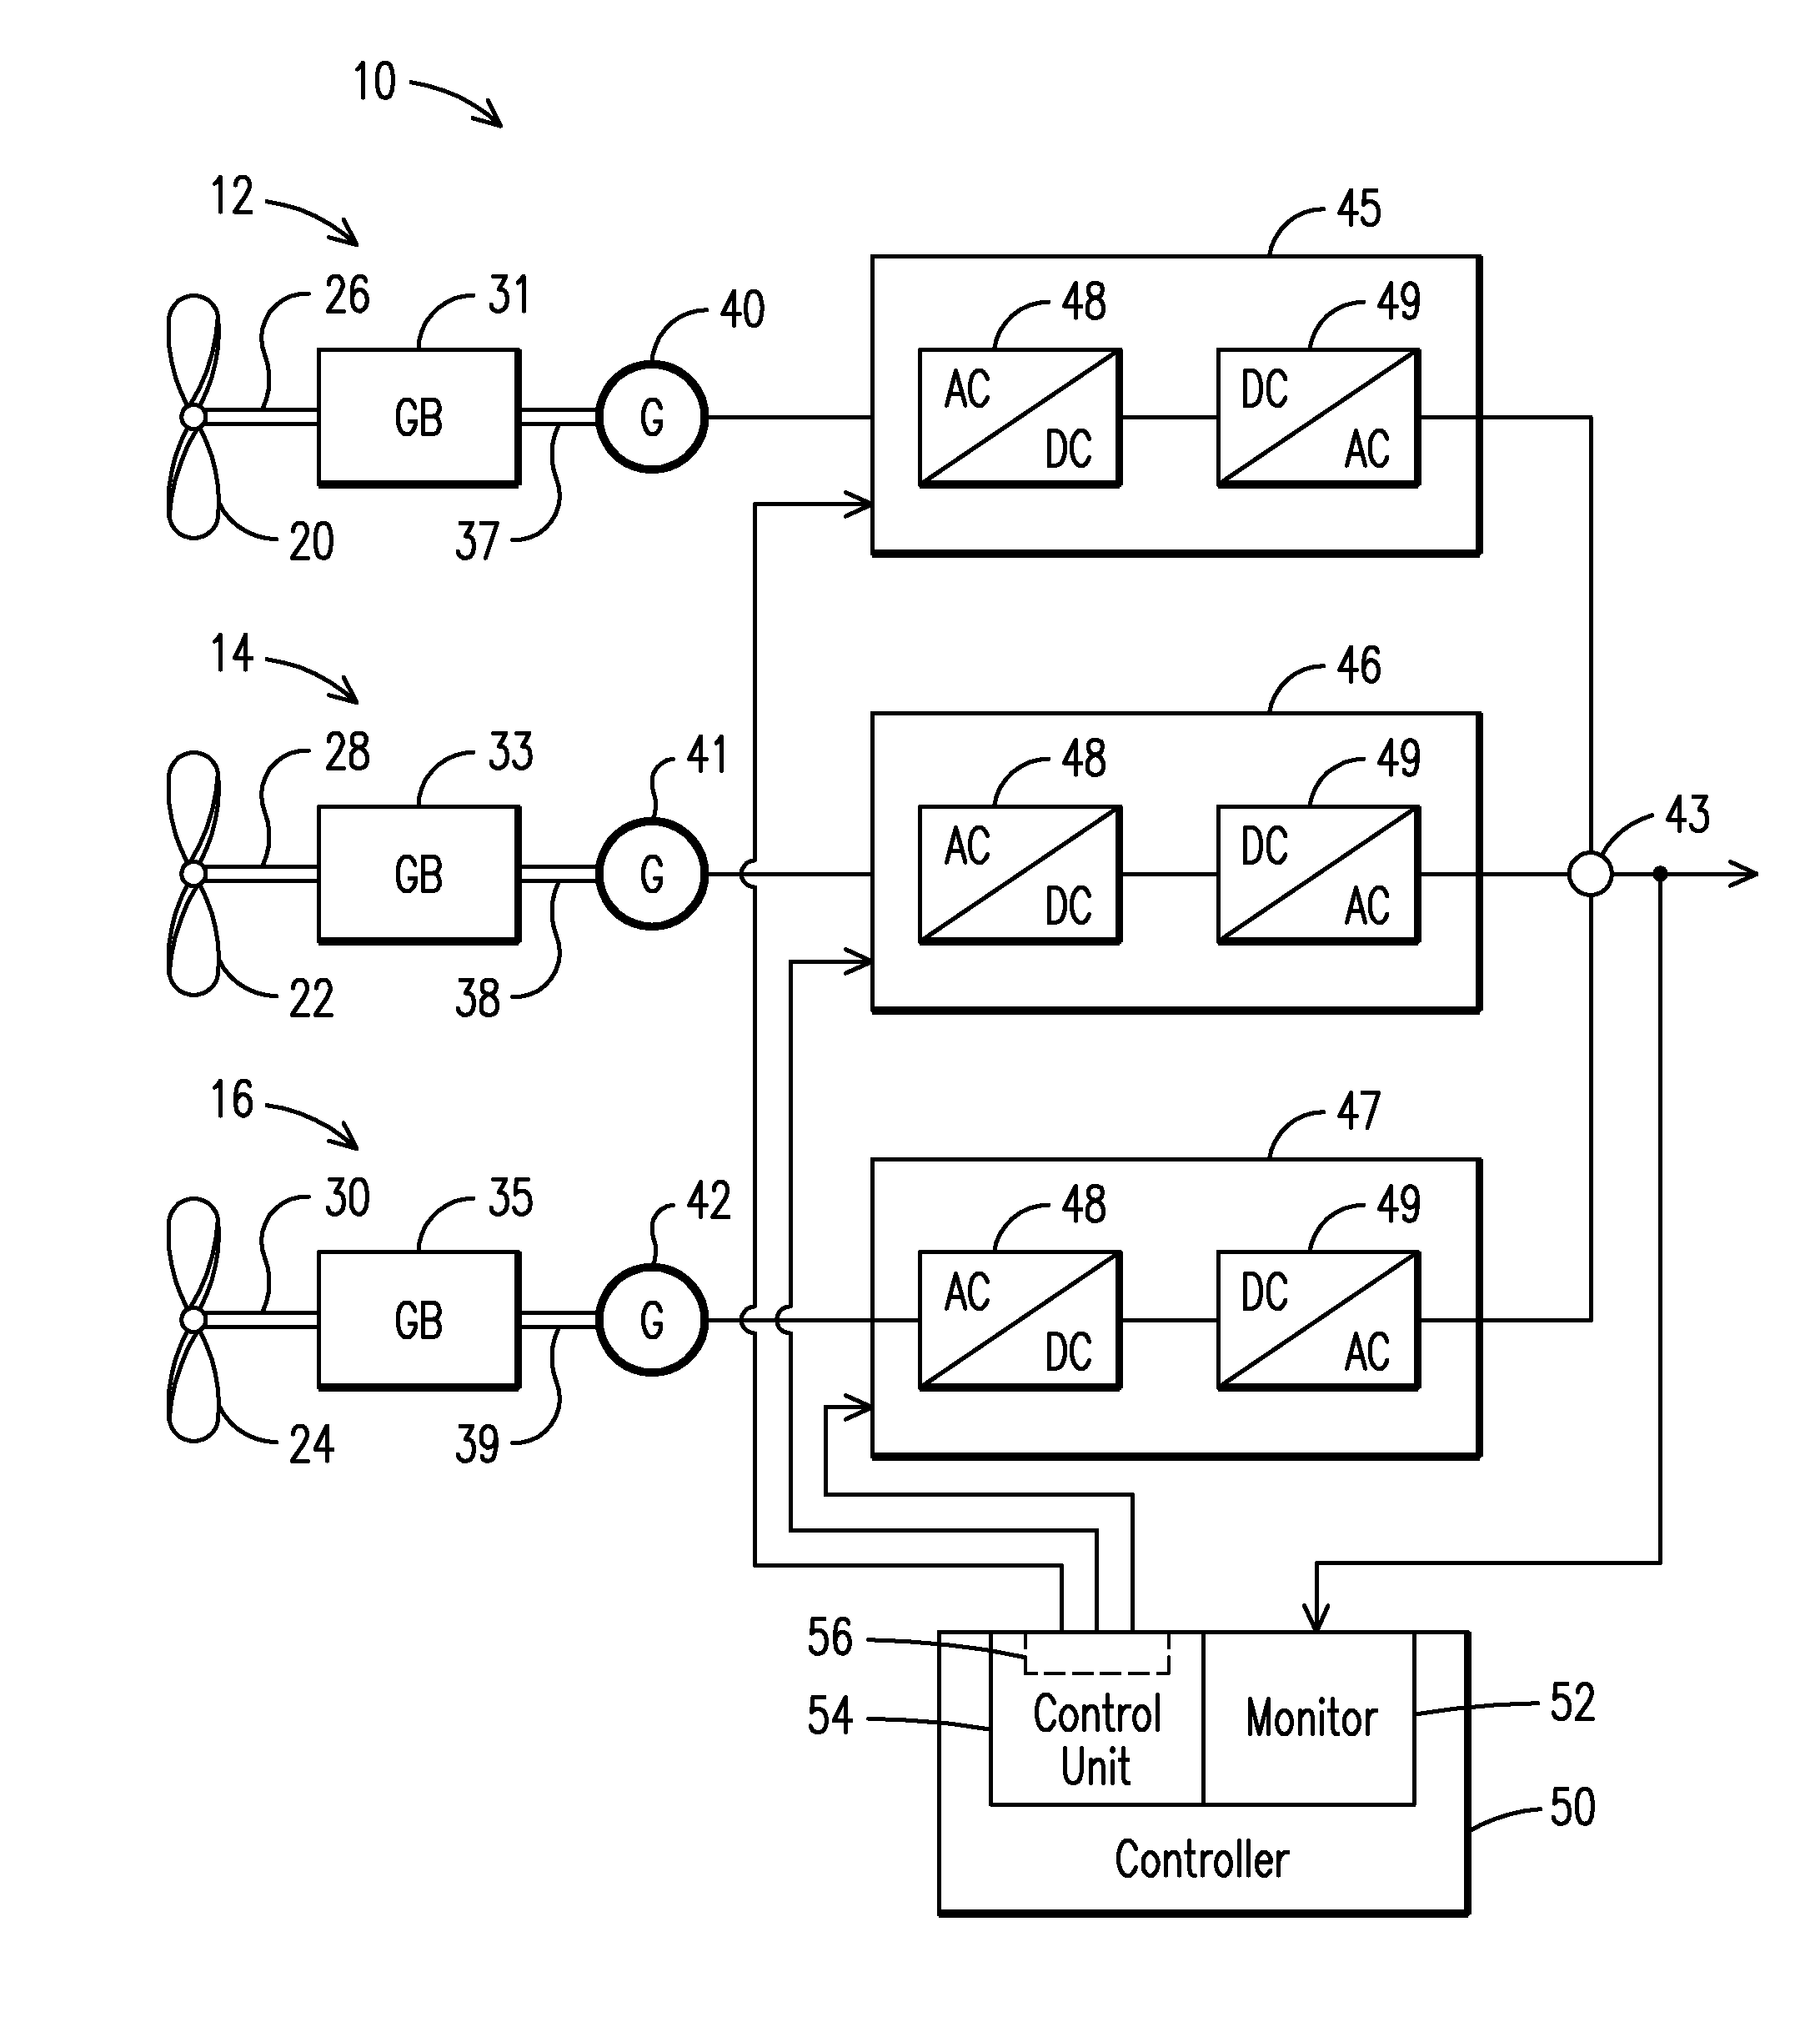 Bang-Bang Controller and Control Method For Variable Speed Wind Turbines During Abnormal Frequency Conditions